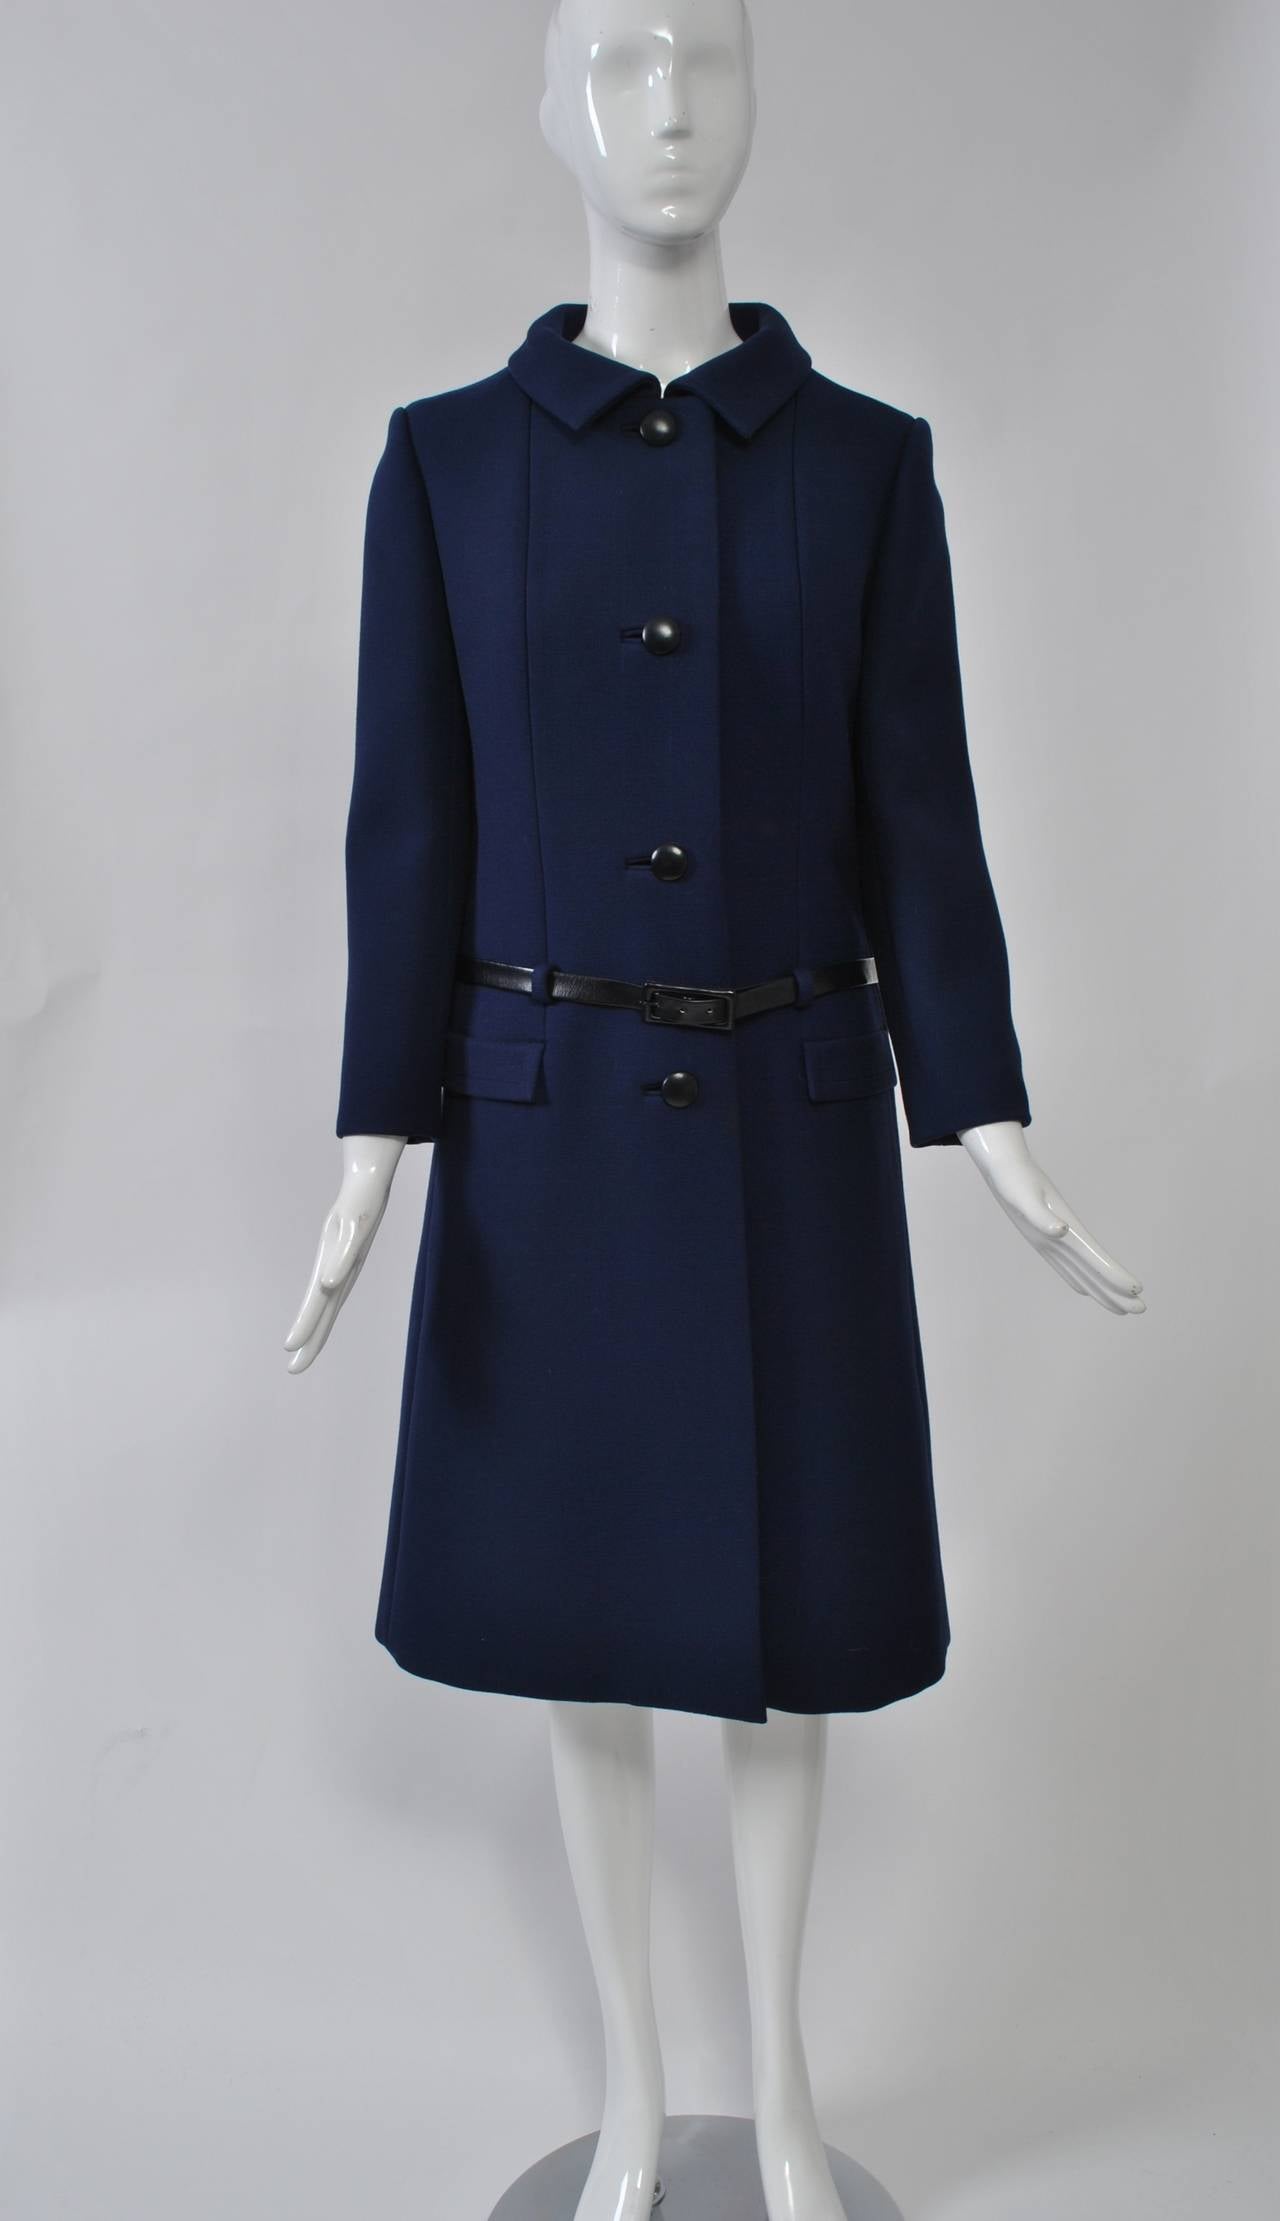 Originala produced some of the most fashionable coats and suits in the 1960s and '70s. From 1964-72, Ilie Wacs was head designer. This ensemble, comprised of a navy coat and white dress, is typical of their cutting-edge style and high-end